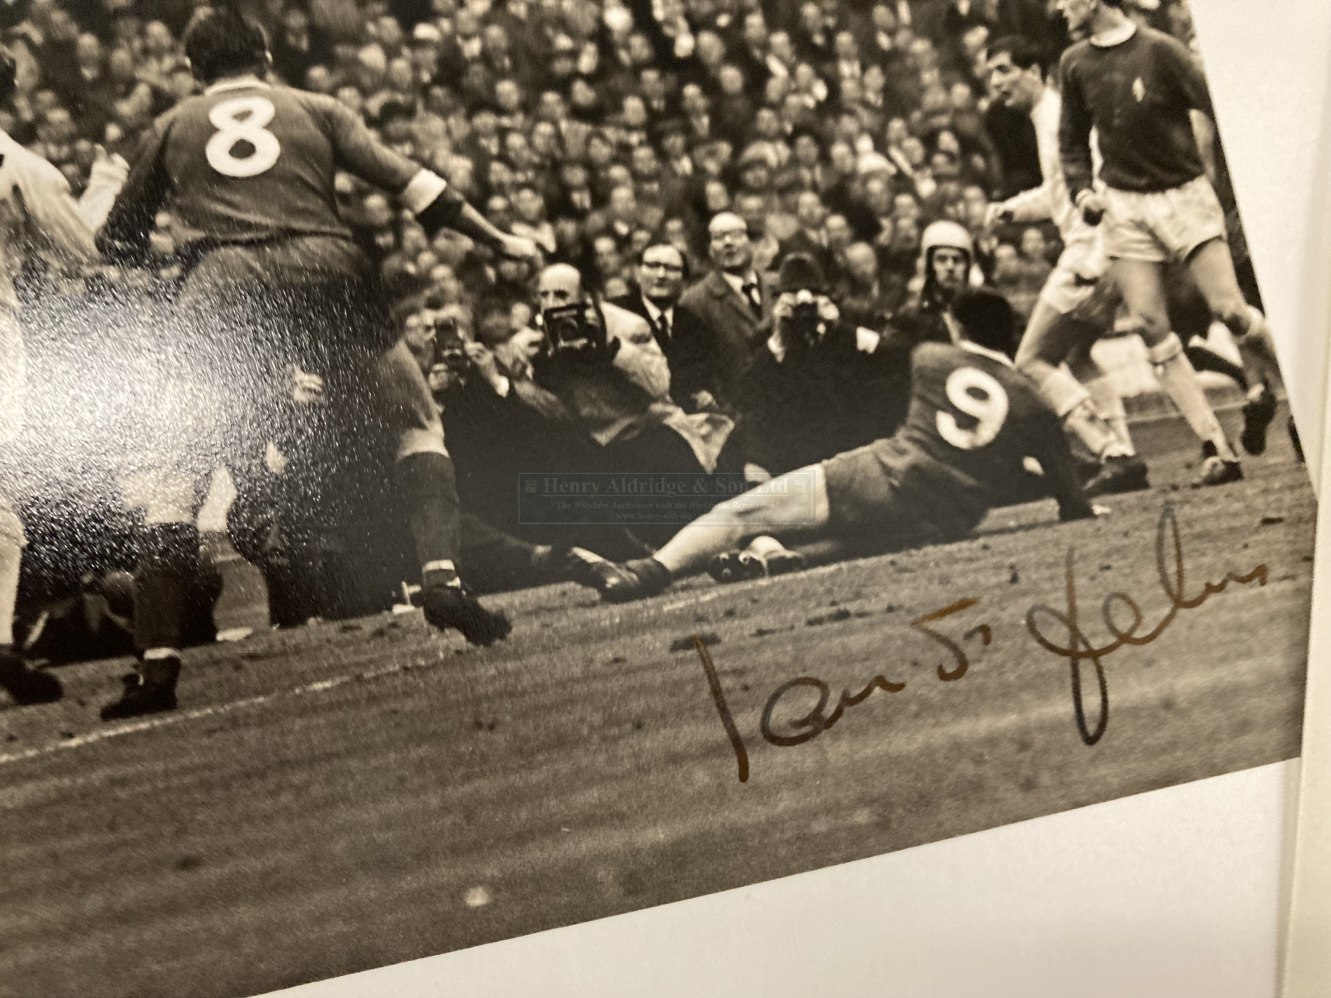 Football: Liverpool, three silver gelatin photographs of 1965 Cup Final, all signed by Ian St. John, - Image 6 of 6